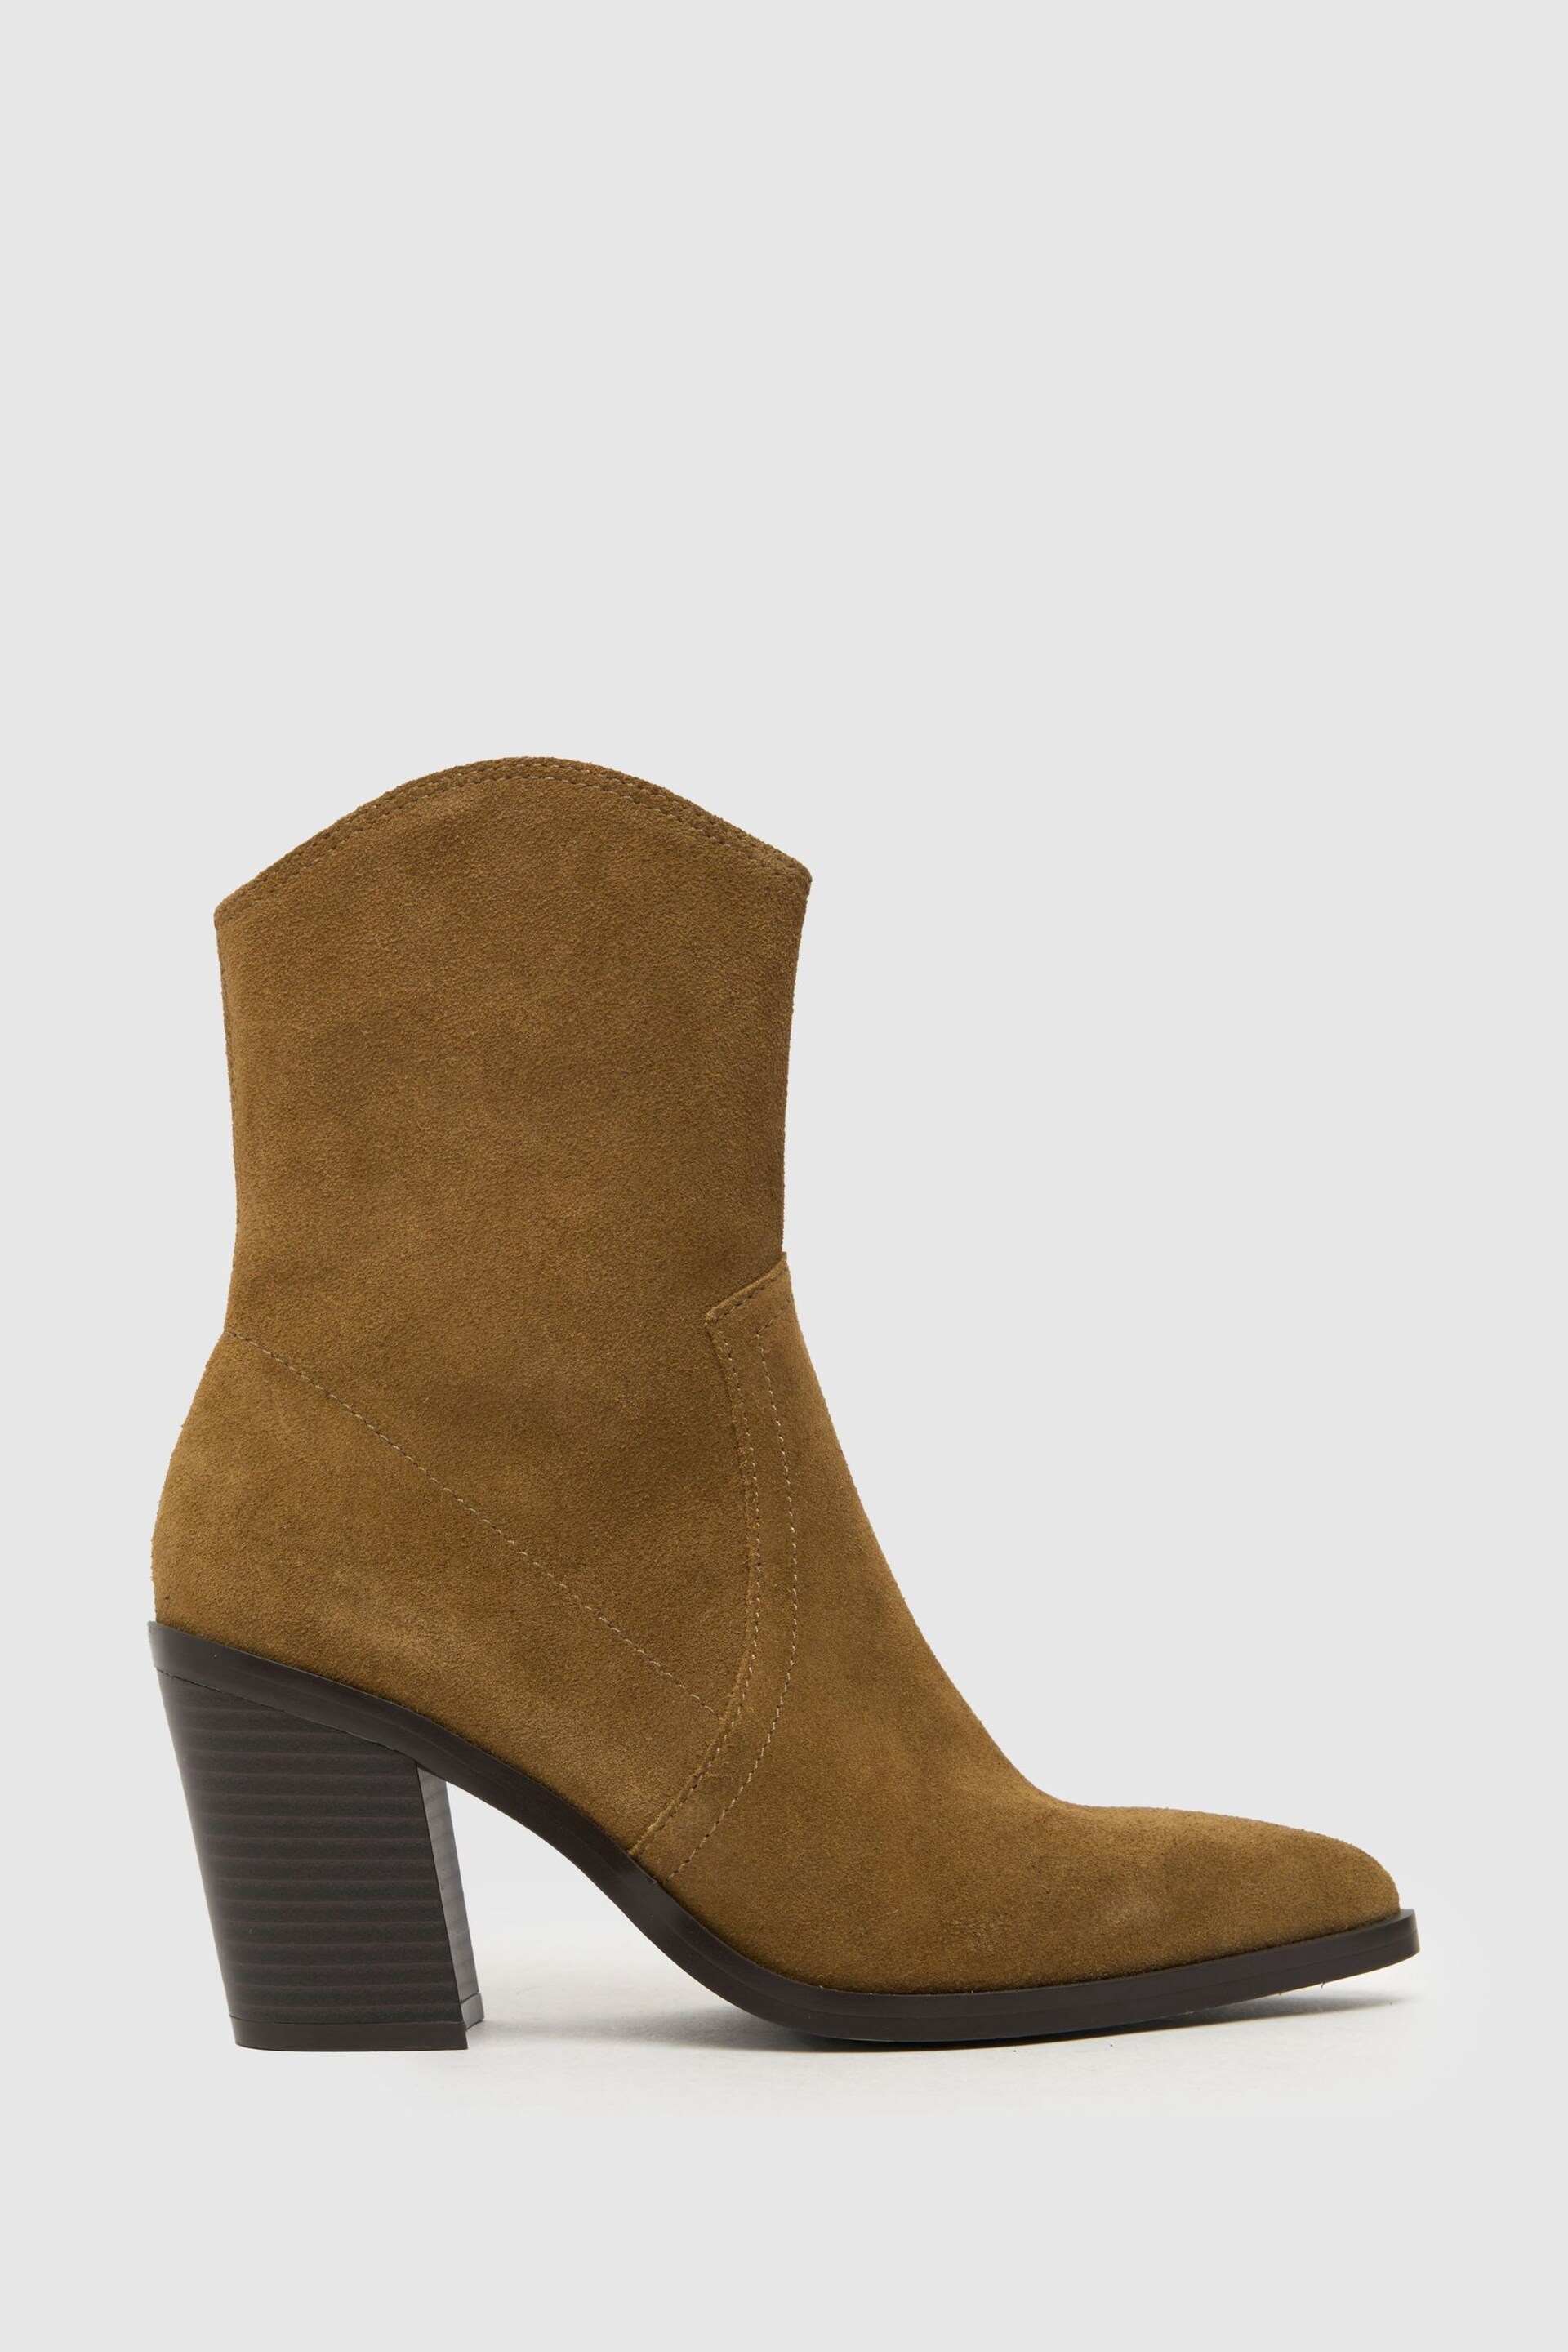 Schuh Angelo Suede Western Boots - Image 1 of 3